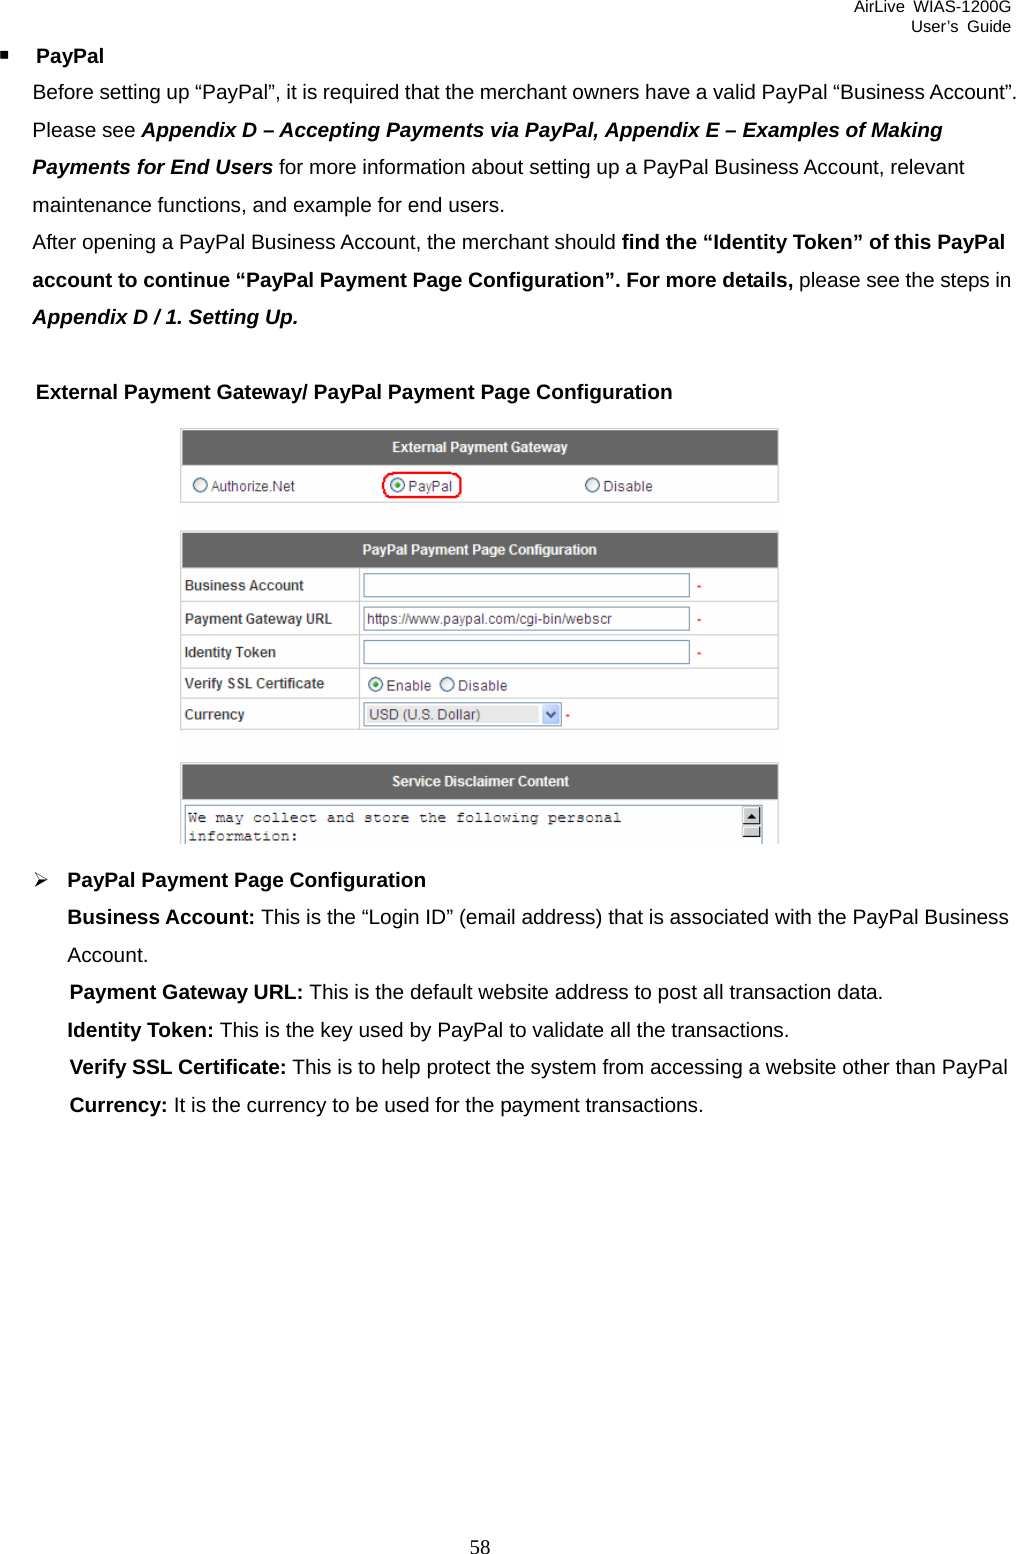 AirLive WIAS-1200G User’s Guide 58  PayPal Before setting up “PayPal”, it is required that the merchant owners have a valid PayPal “Business Account”. Please see Appendix D – Accepting Payments via PayPal, Appendix E – Examples of Making Payments for End Users for more information about setting up a PayPal Business Account, relevant maintenance functions, and example for end users. After opening a PayPal Business Account, the merchant should find the “Identity Token” of this PayPal account to continue “PayPal Payment Page Configuration”. For more details, please see the steps in Appendix D / 1. Setting Up.  External Payment Gateway/ PayPal Payment Page Configuration  ¾ PayPal Payment Page Configuration Business Account: This is the “Login ID” (email address) that is associated with the PayPal Business Account. Payment Gateway URL: This is the default website address to post all transaction data. Identity Token: This is the key used by PayPal to validate all the transactions. Verify SSL Certificate: This is to help protect the system from accessing a website other than PayPal Currency: It is the currency to be used for the payment transactions.  